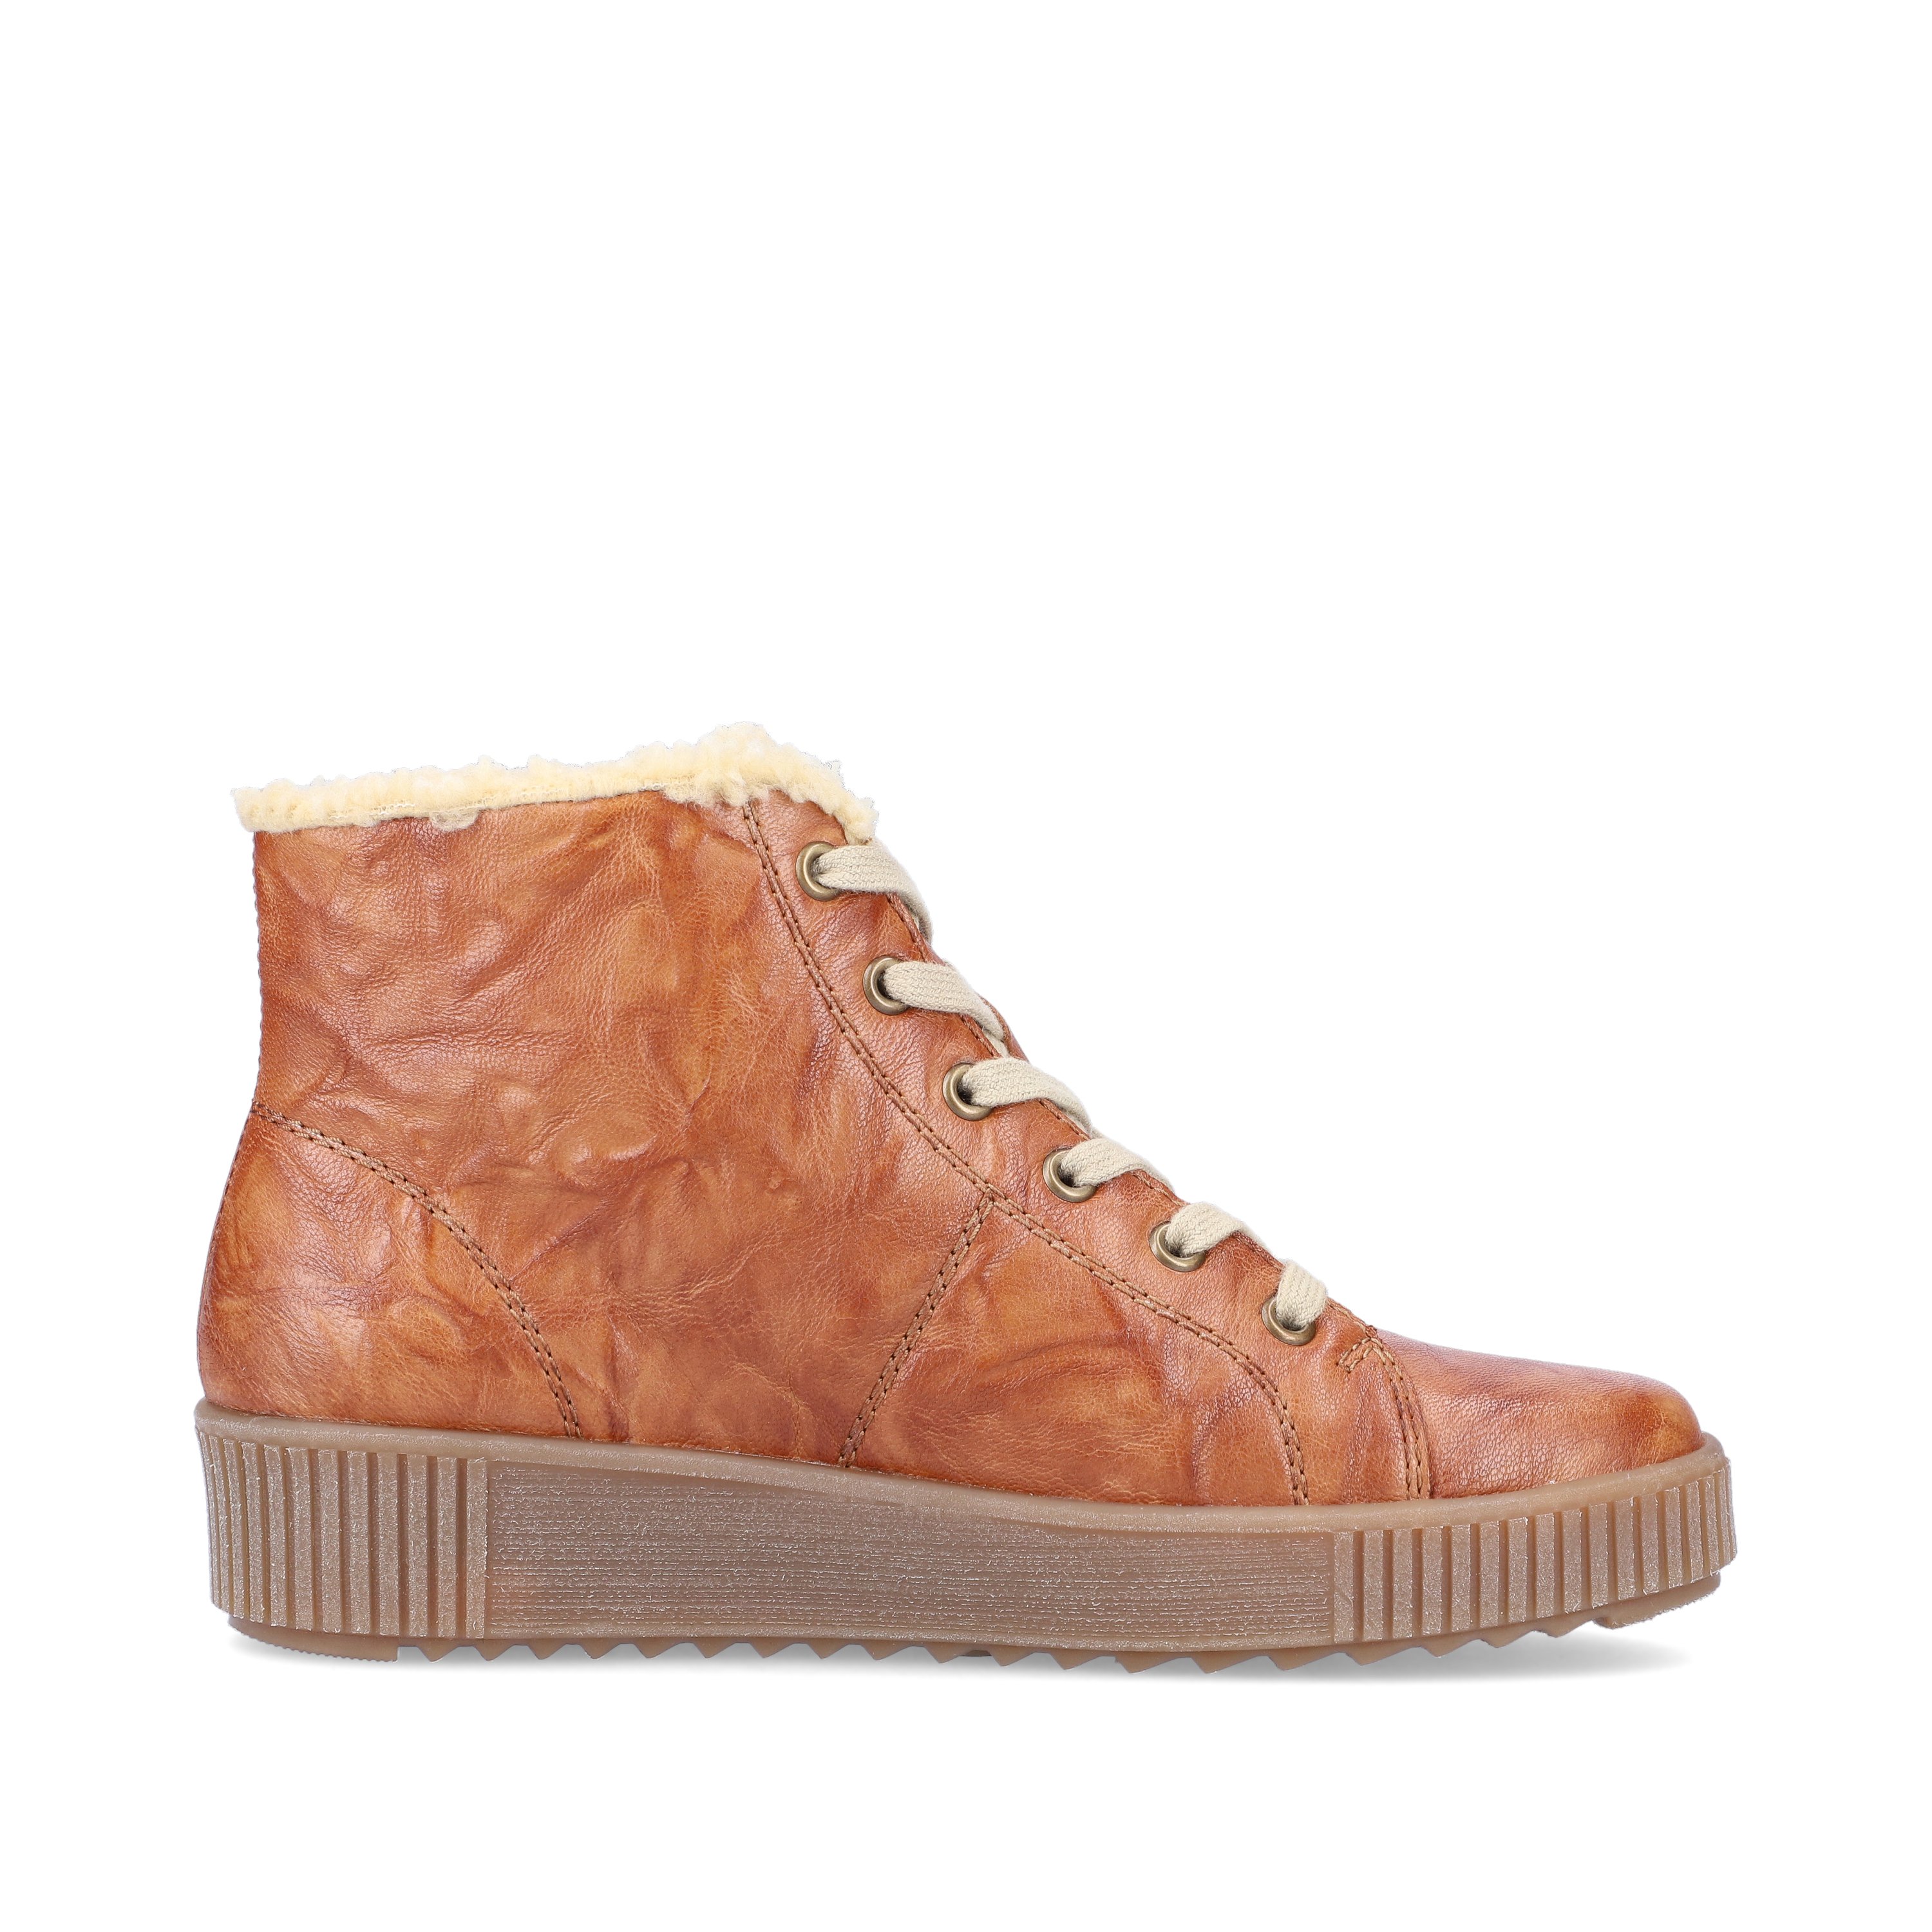 Wood brown remonte women´s lace-up boots R7980-23 with flexible platform sole. Shoe inside